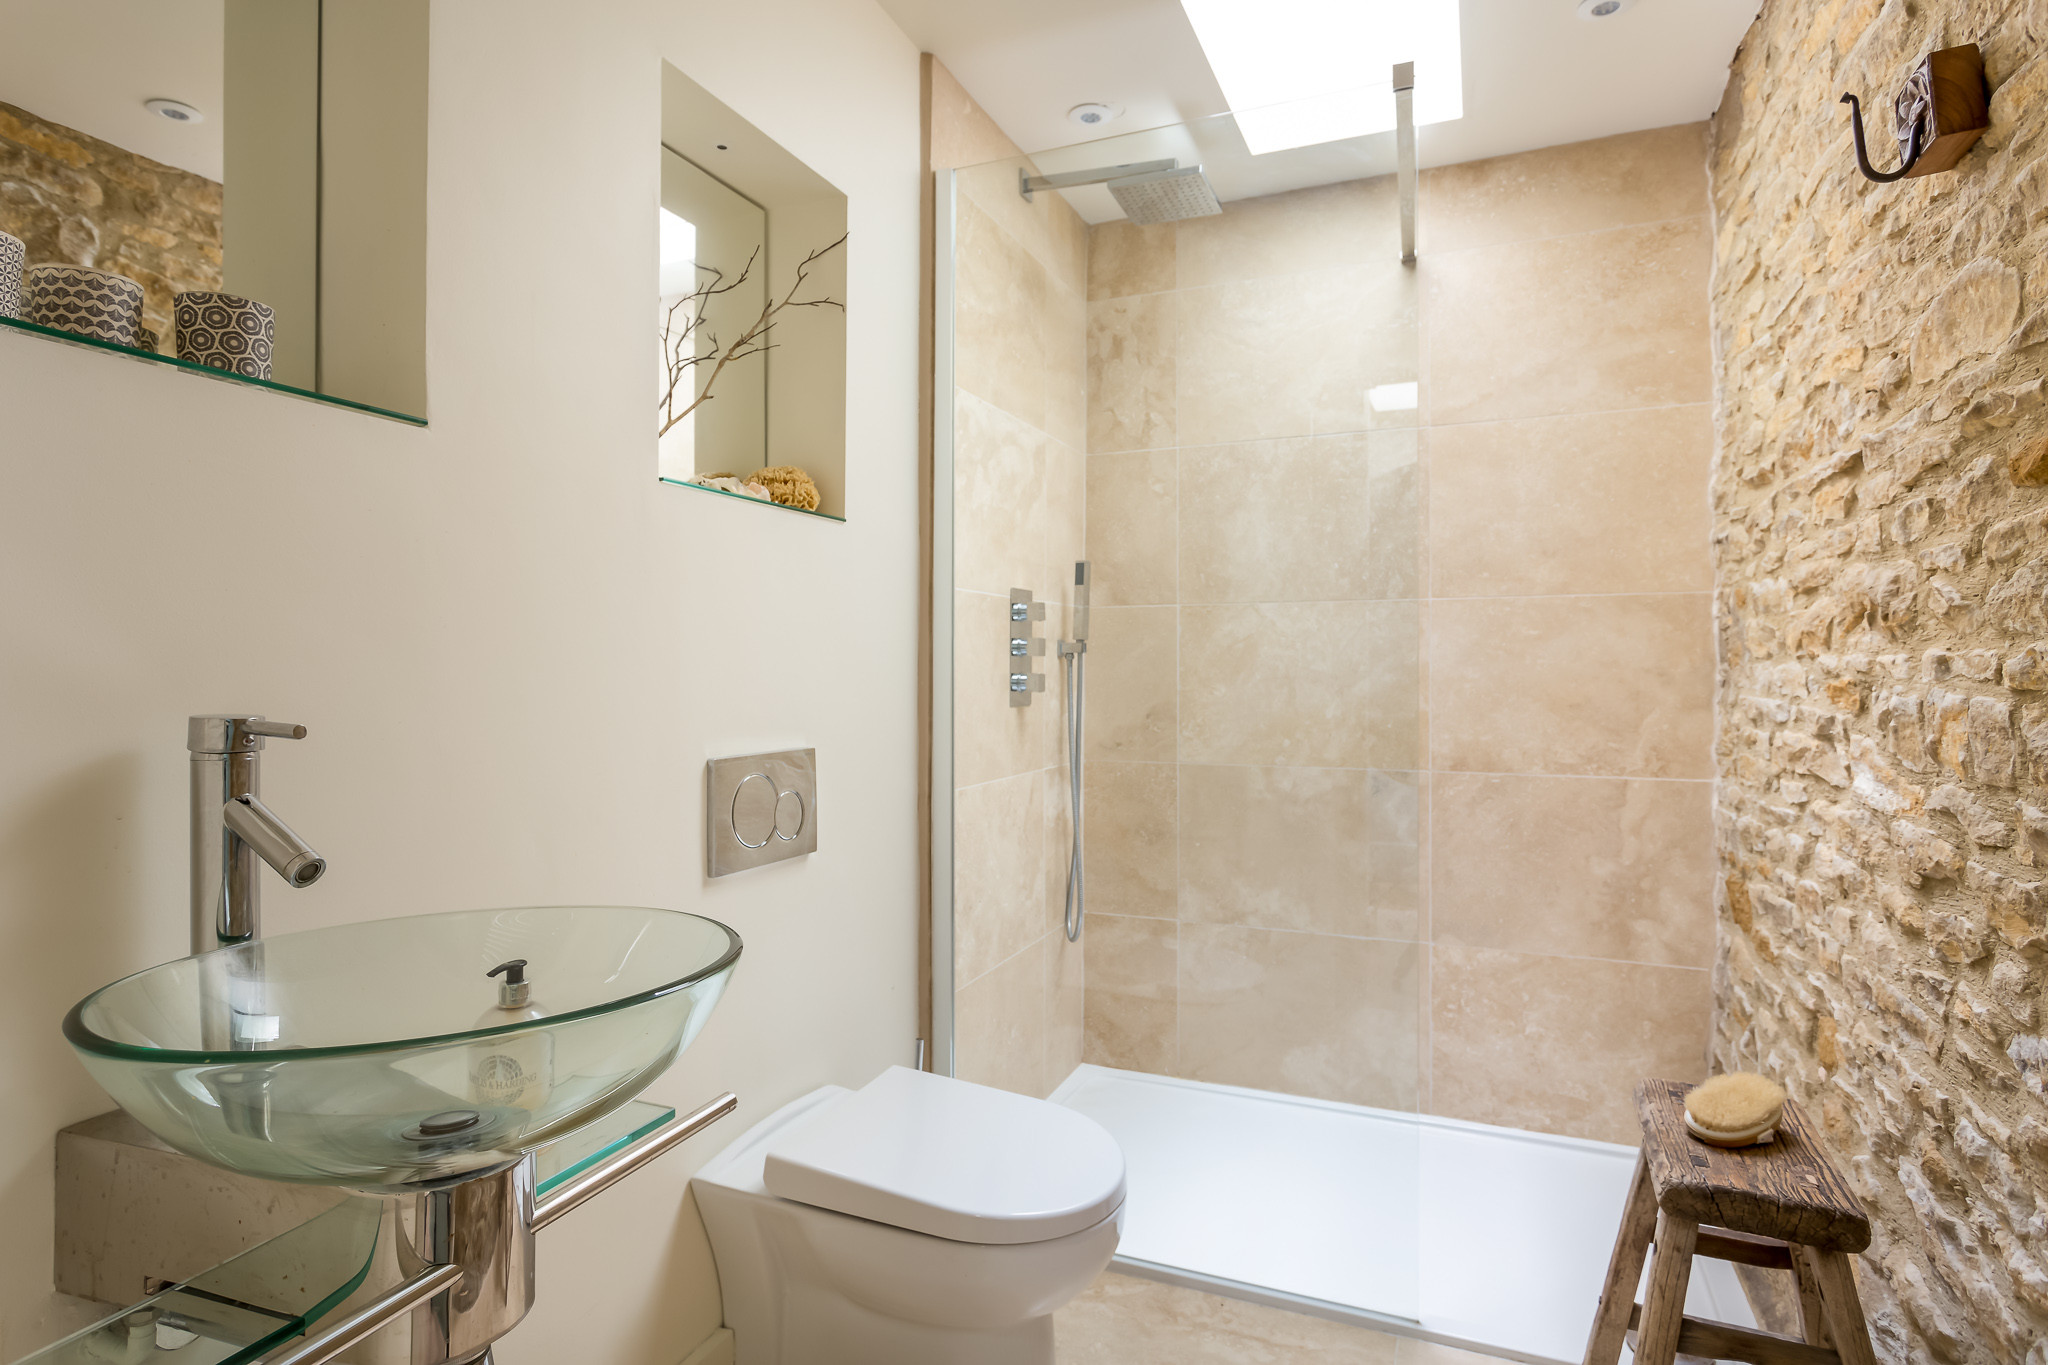 Shower Installation Services | A1 Discount Plumber 